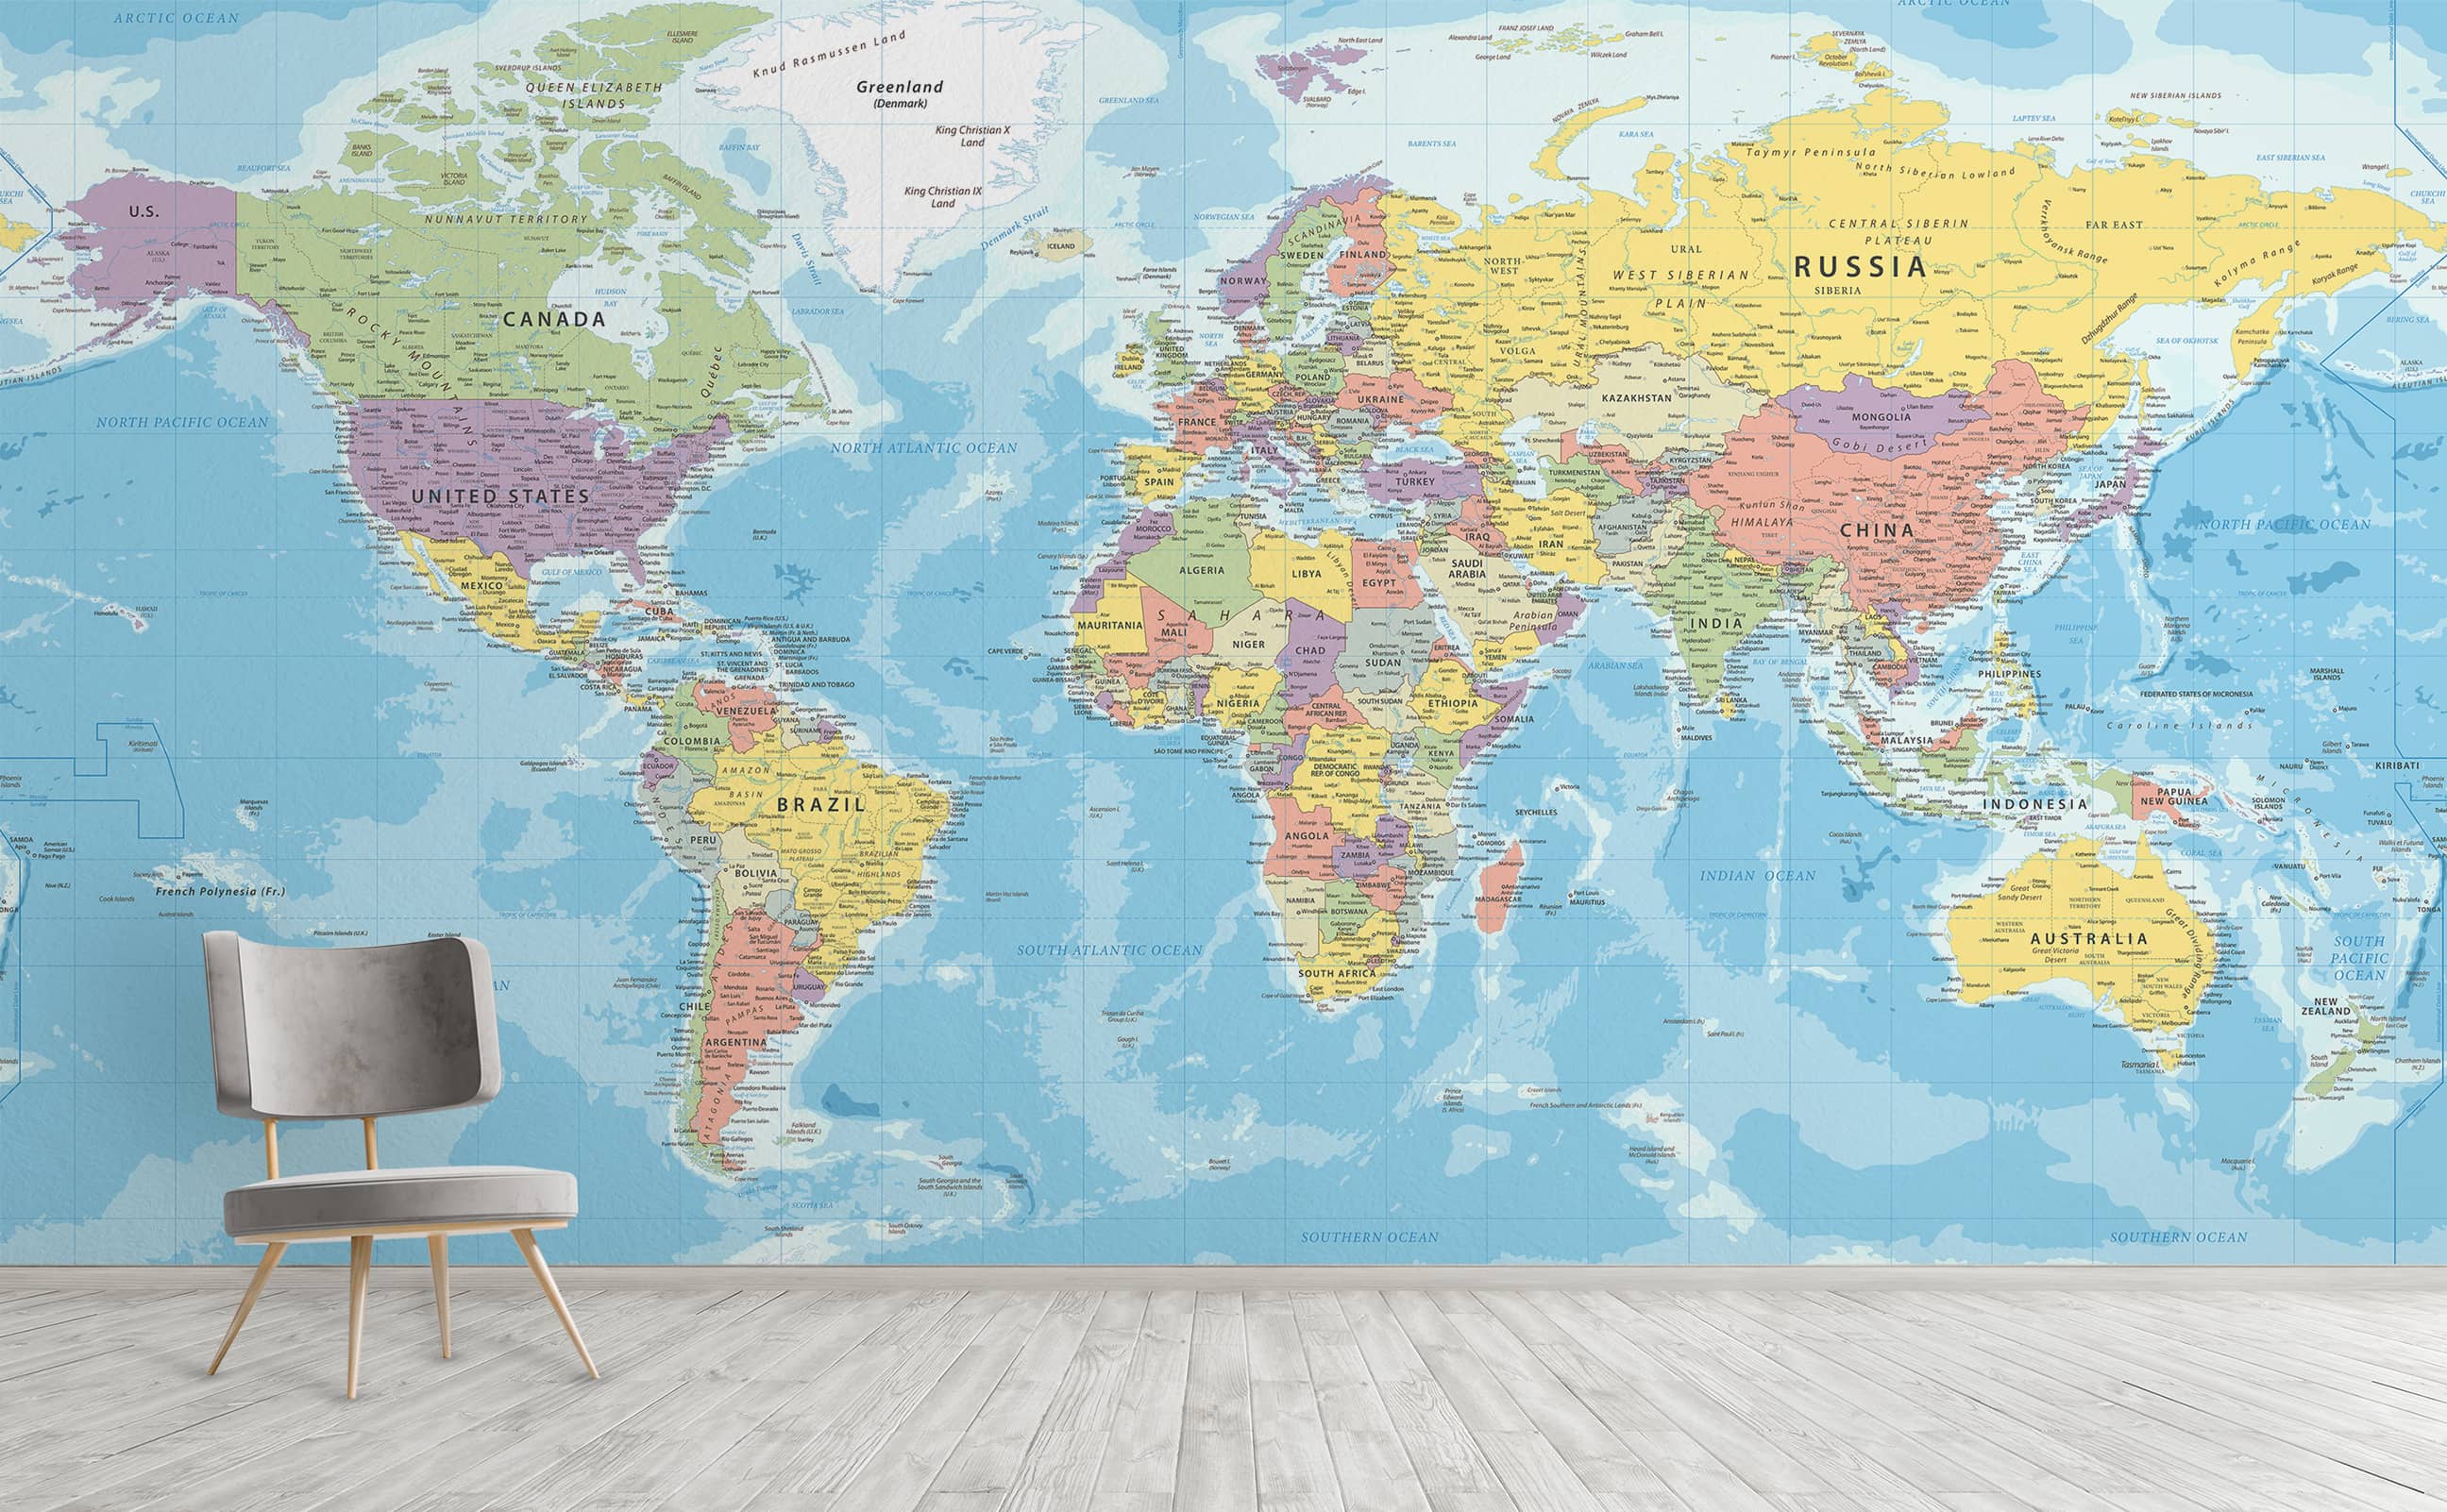 Classic colorful political world map wall mural